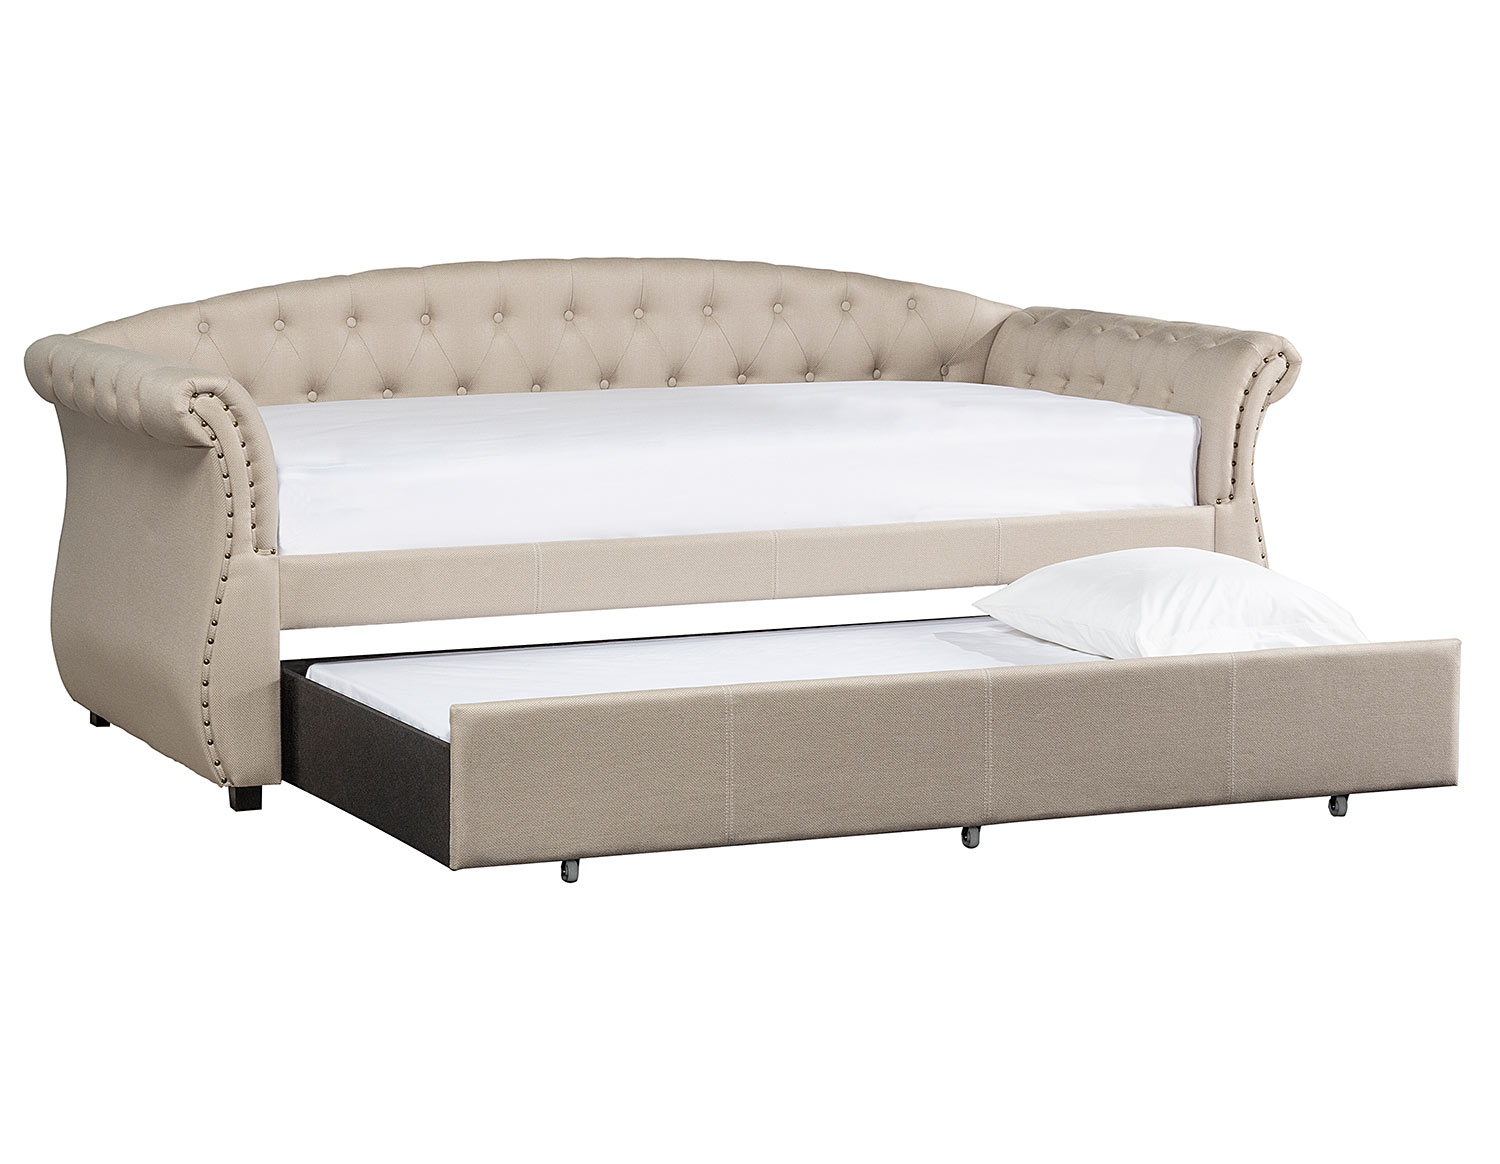 Hillsdale Harlow Twin Daybed and Trundle - Soft White/Linen Sandstone